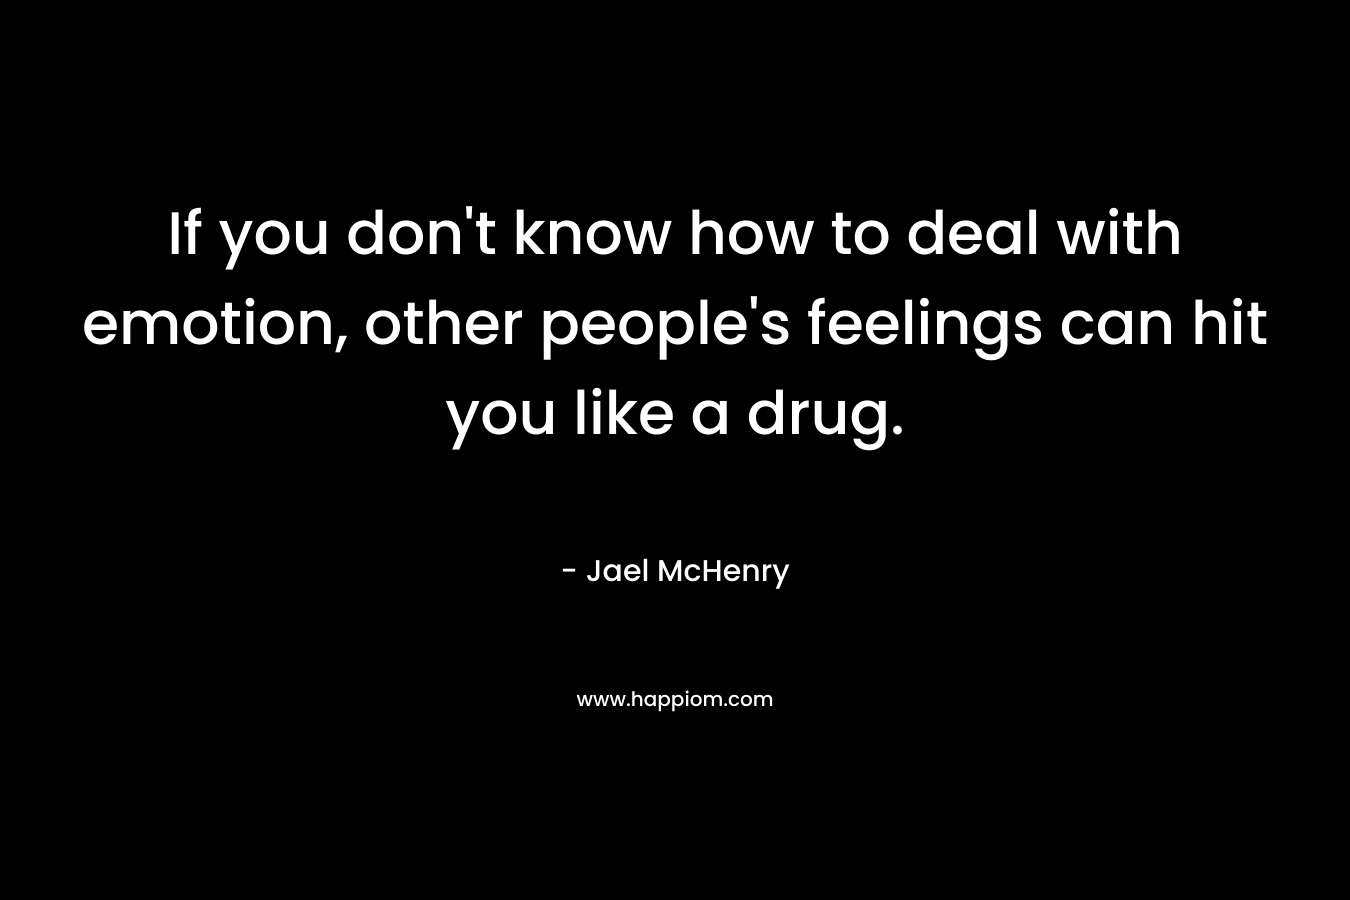 If you don’t know how to deal with emotion, other people’s feelings can hit you like a drug. – Jael McHenry